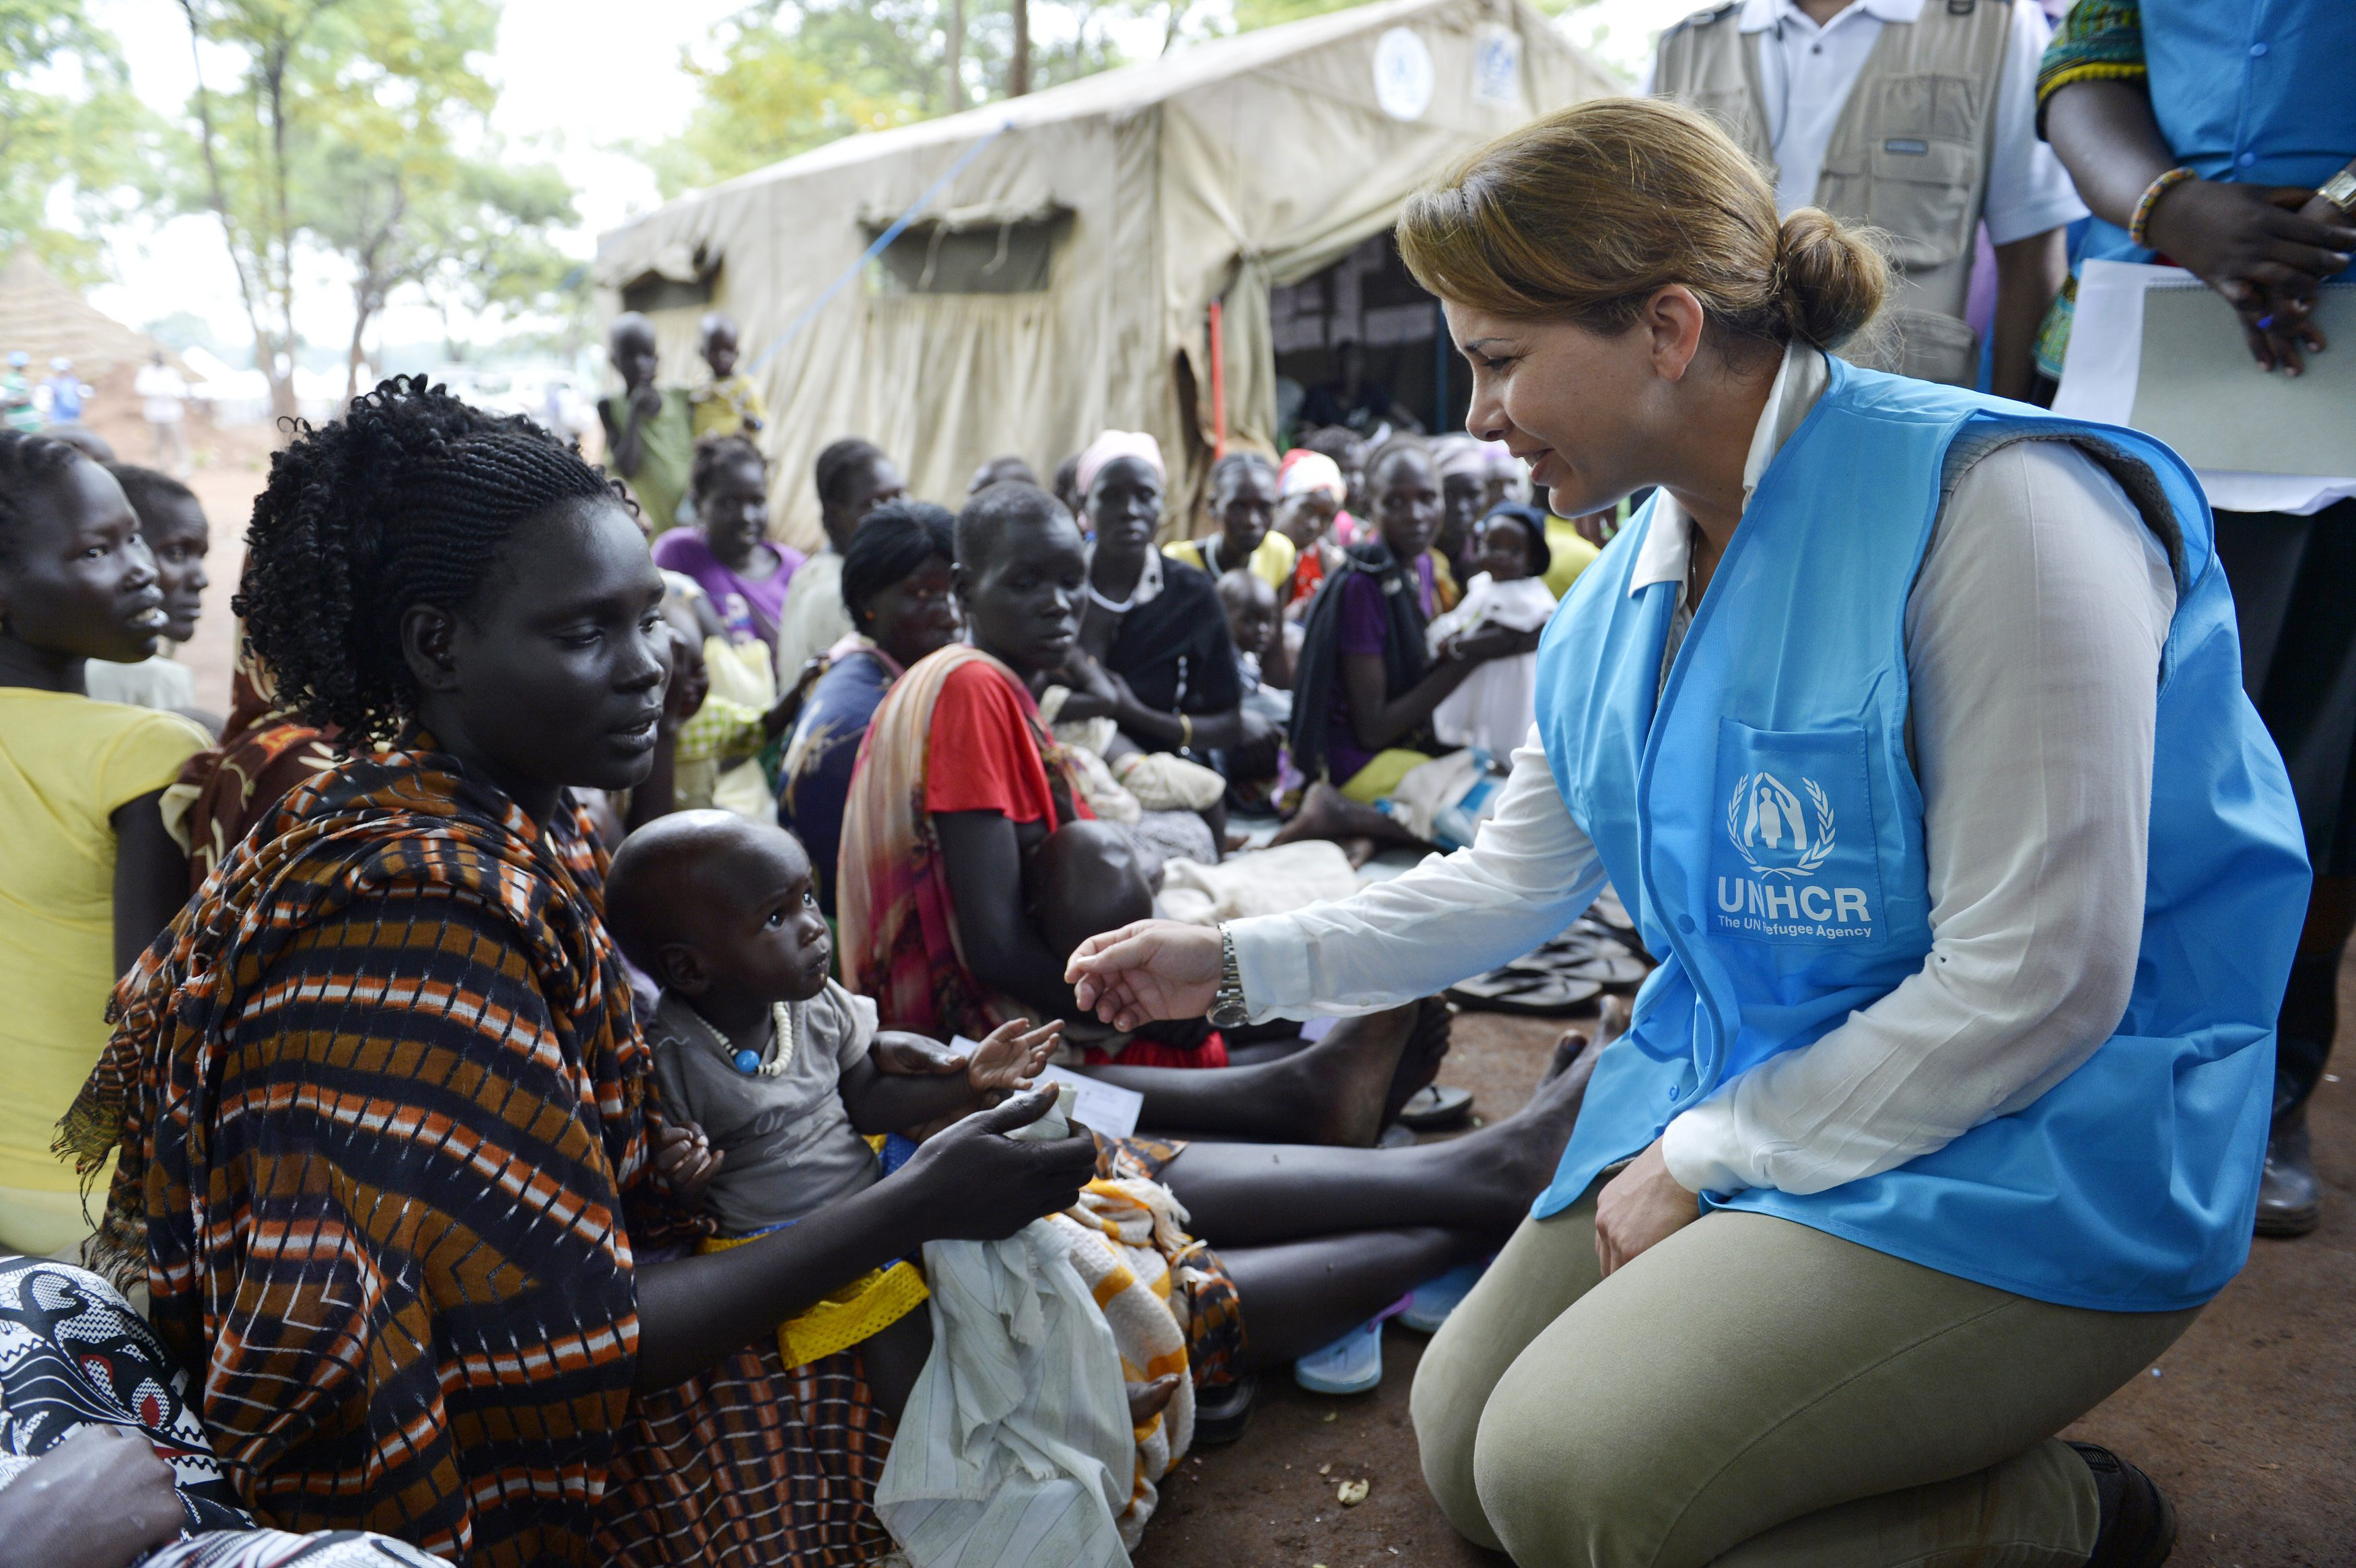 Ethiopia / On 15 July 2014, Her Royal Highness Prince Haya Bin Al Hussein visited Kule2 refugee camp in Gambella, western Ethiopia, home to over 50,000 South Sudanese refugees. In these photos, Princess Haya talks to representatives of refugee women who shared with her their flight experiences as well as challenges in the camp. Opened in May 2014 to accommodate the continued exodus of South Sudanese refugees, the camp is full just under two months. / UNHCR / UNHCR / R. Julliart / July 2014 ;